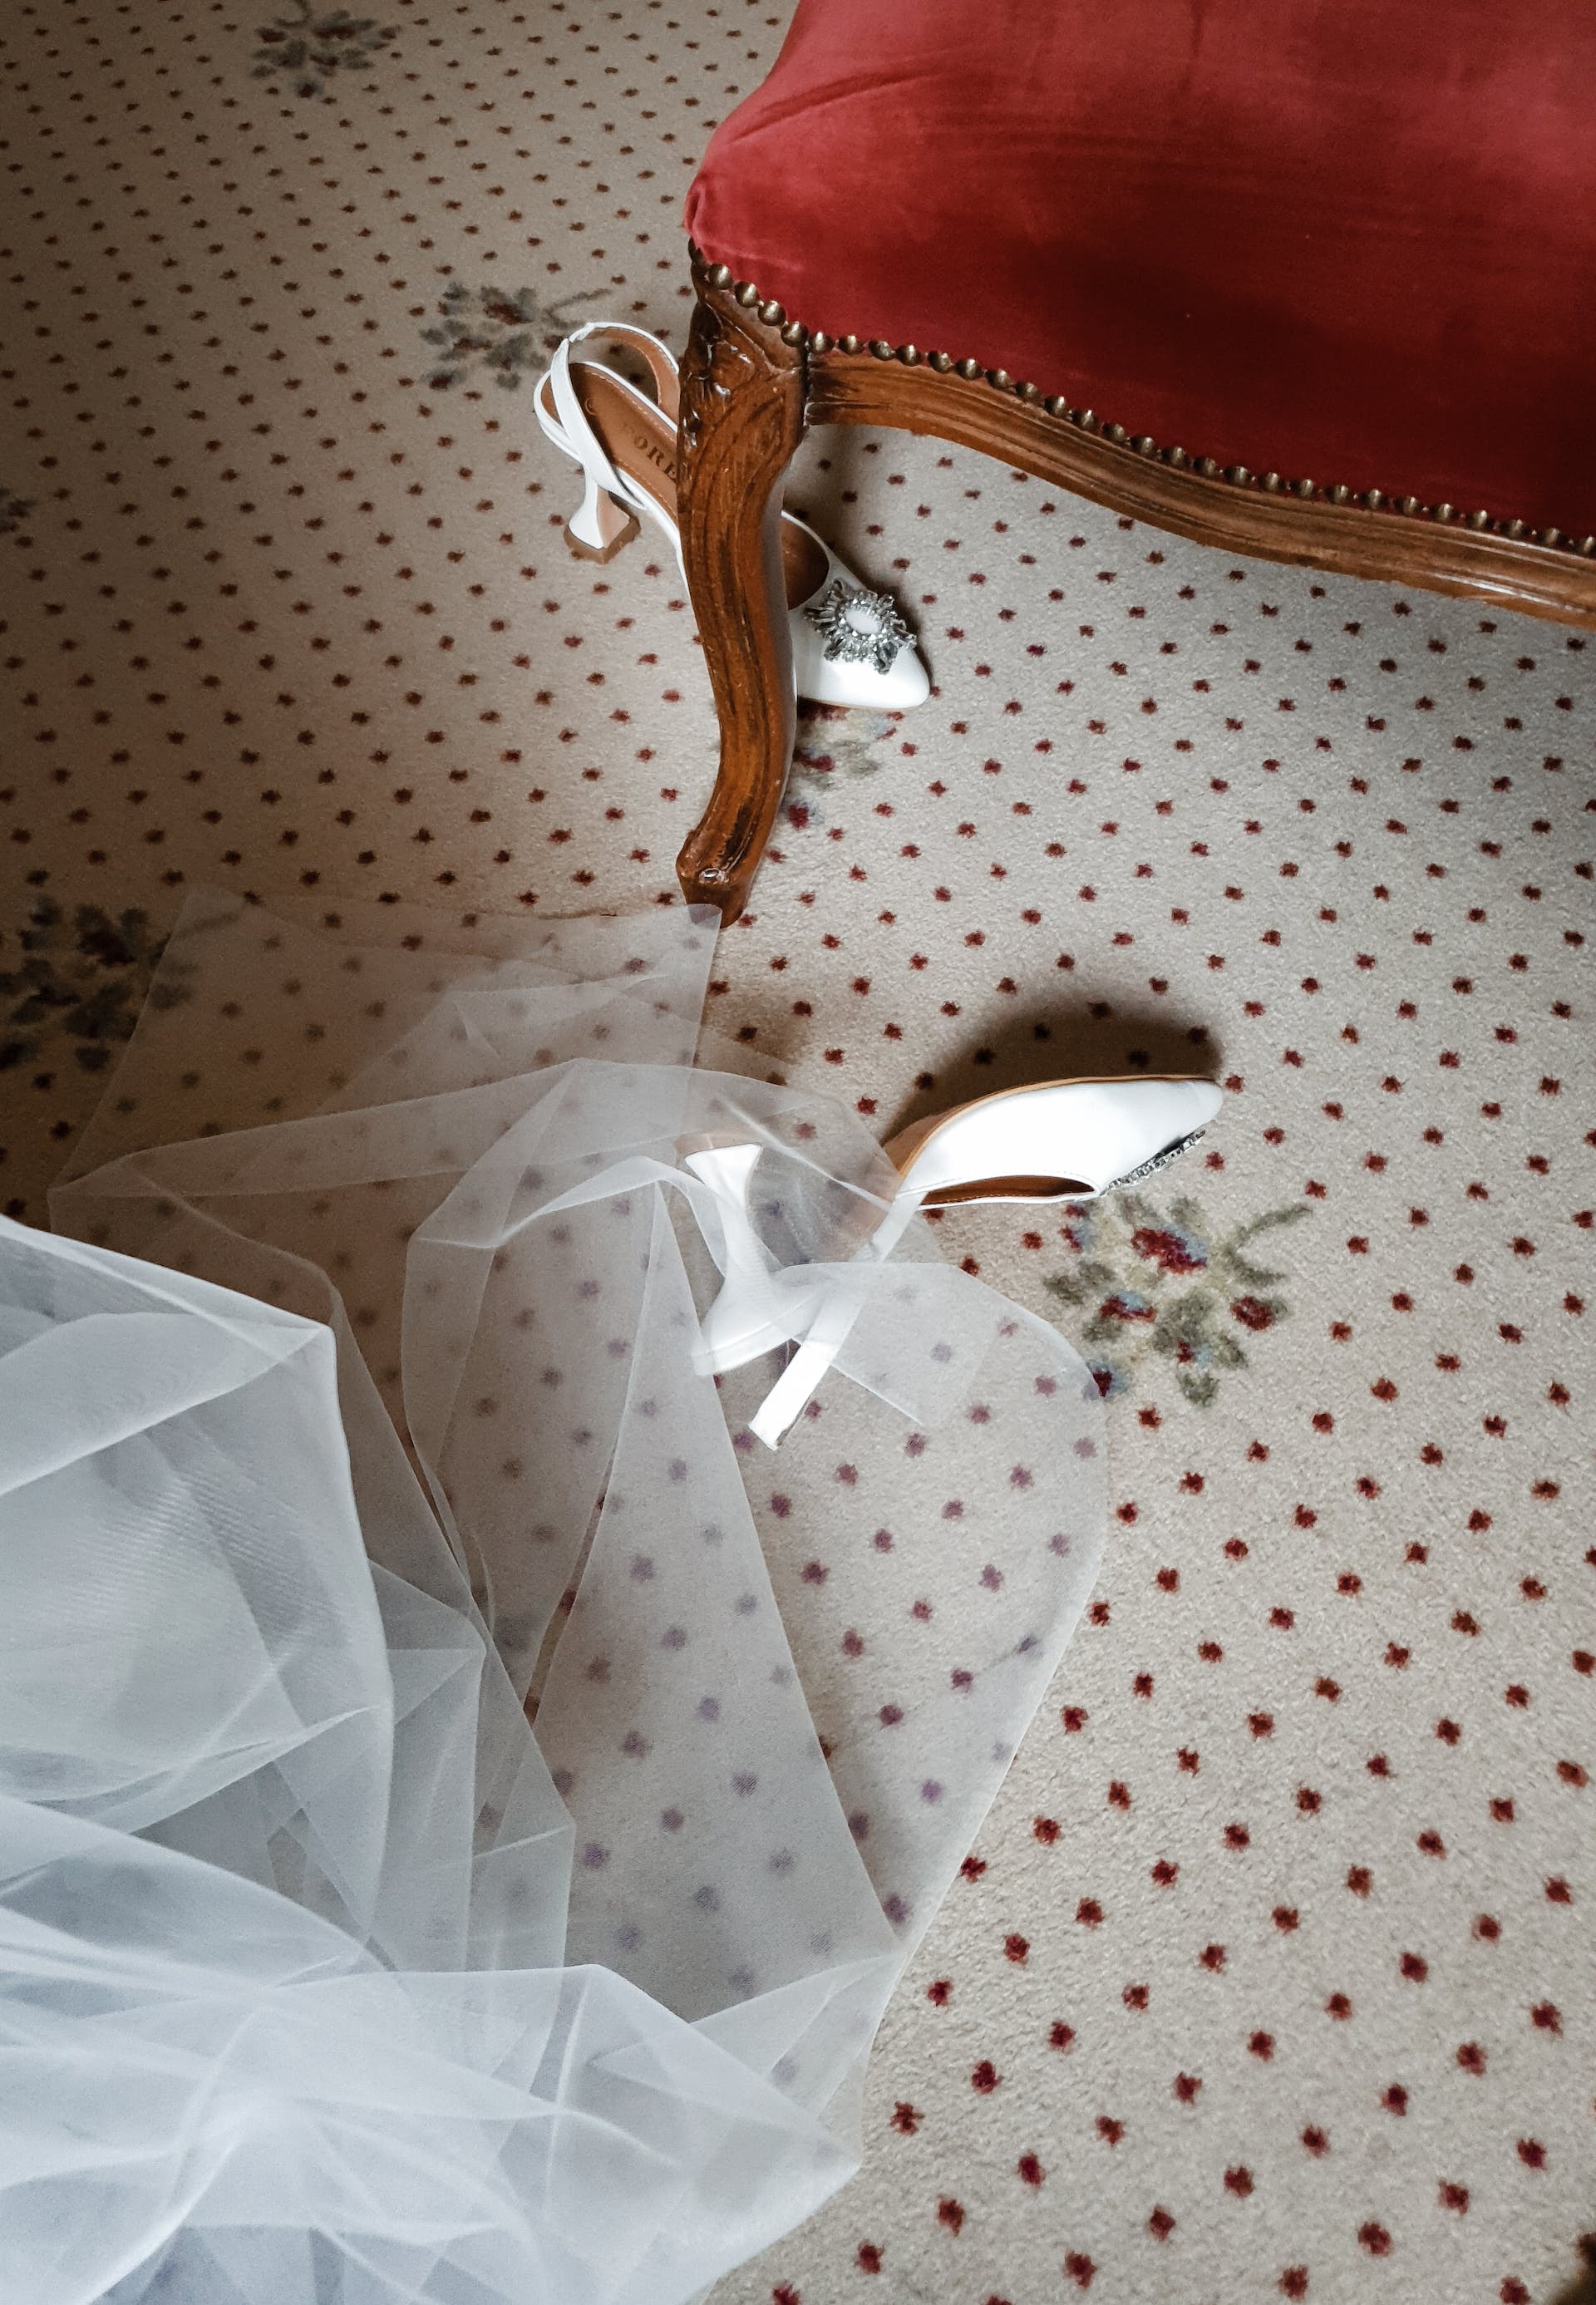 A bride's wedding dress and shoes on the floor | Source: Pexels